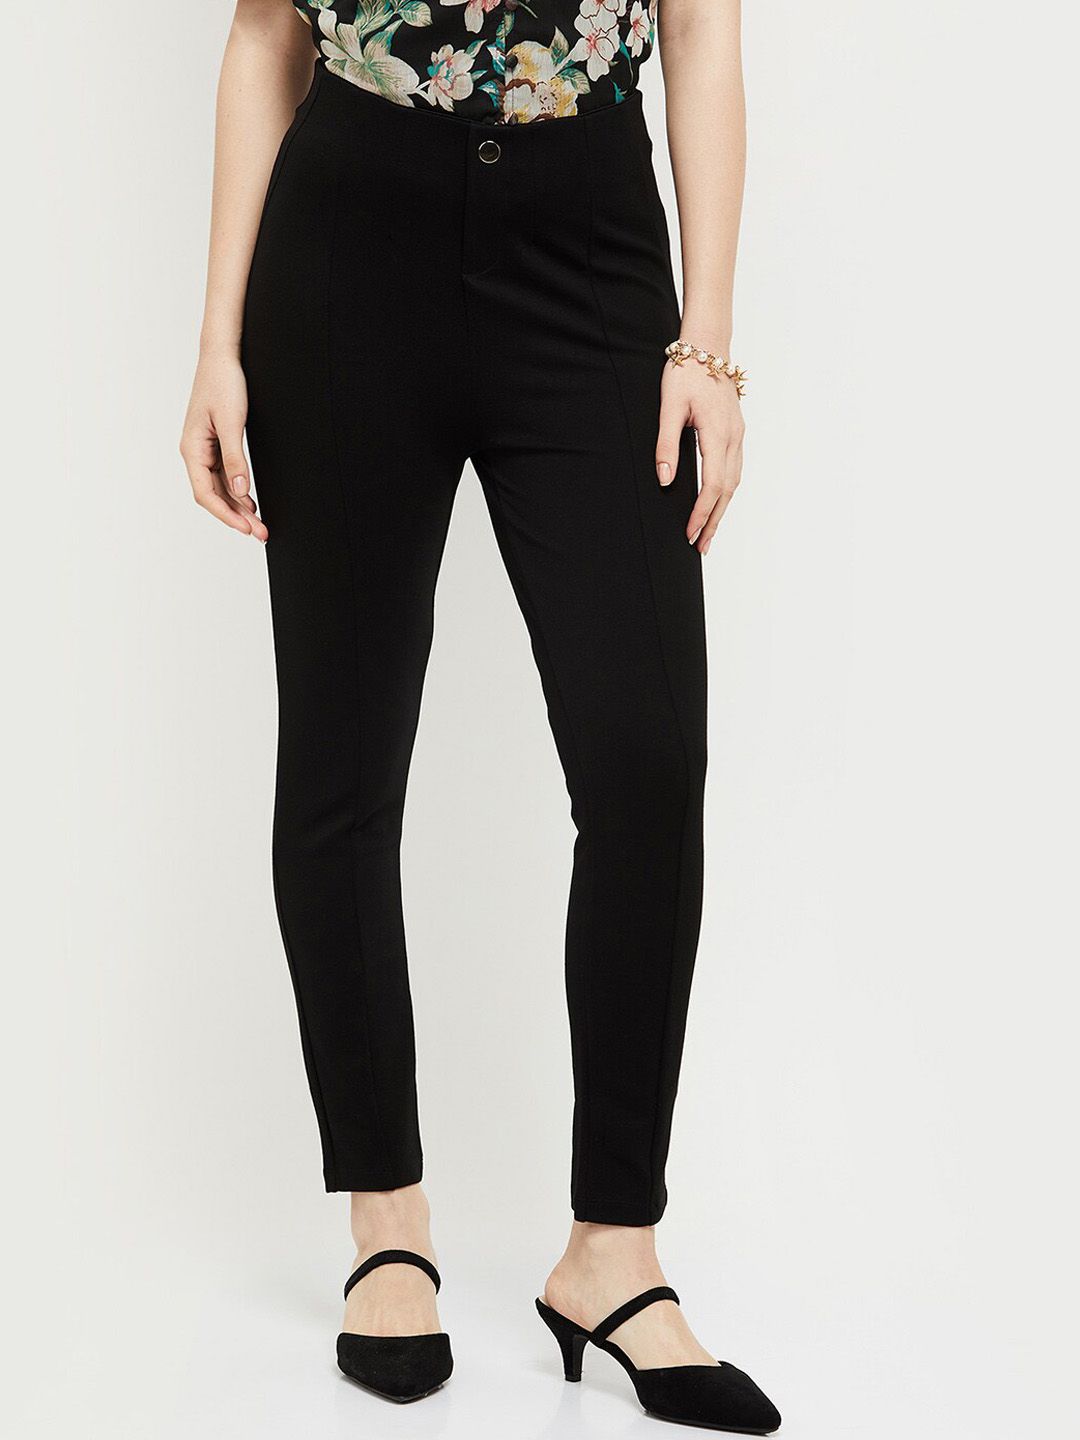 max Women Black Trousers Price in India